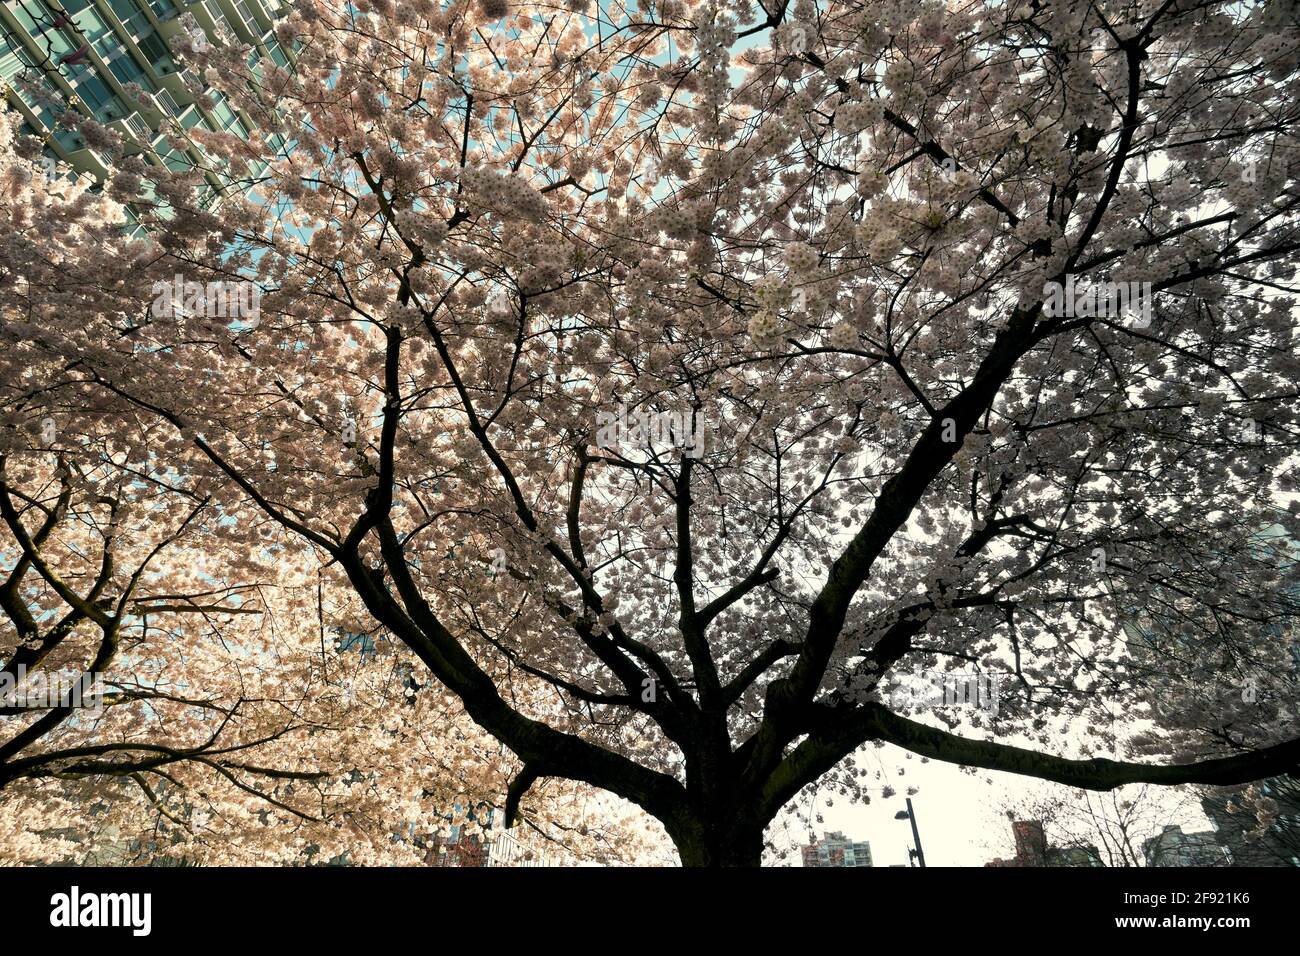 Blossoming ornamental cherry tree from below in spring, Vancouver, British Columbia, Canada Stock Photo